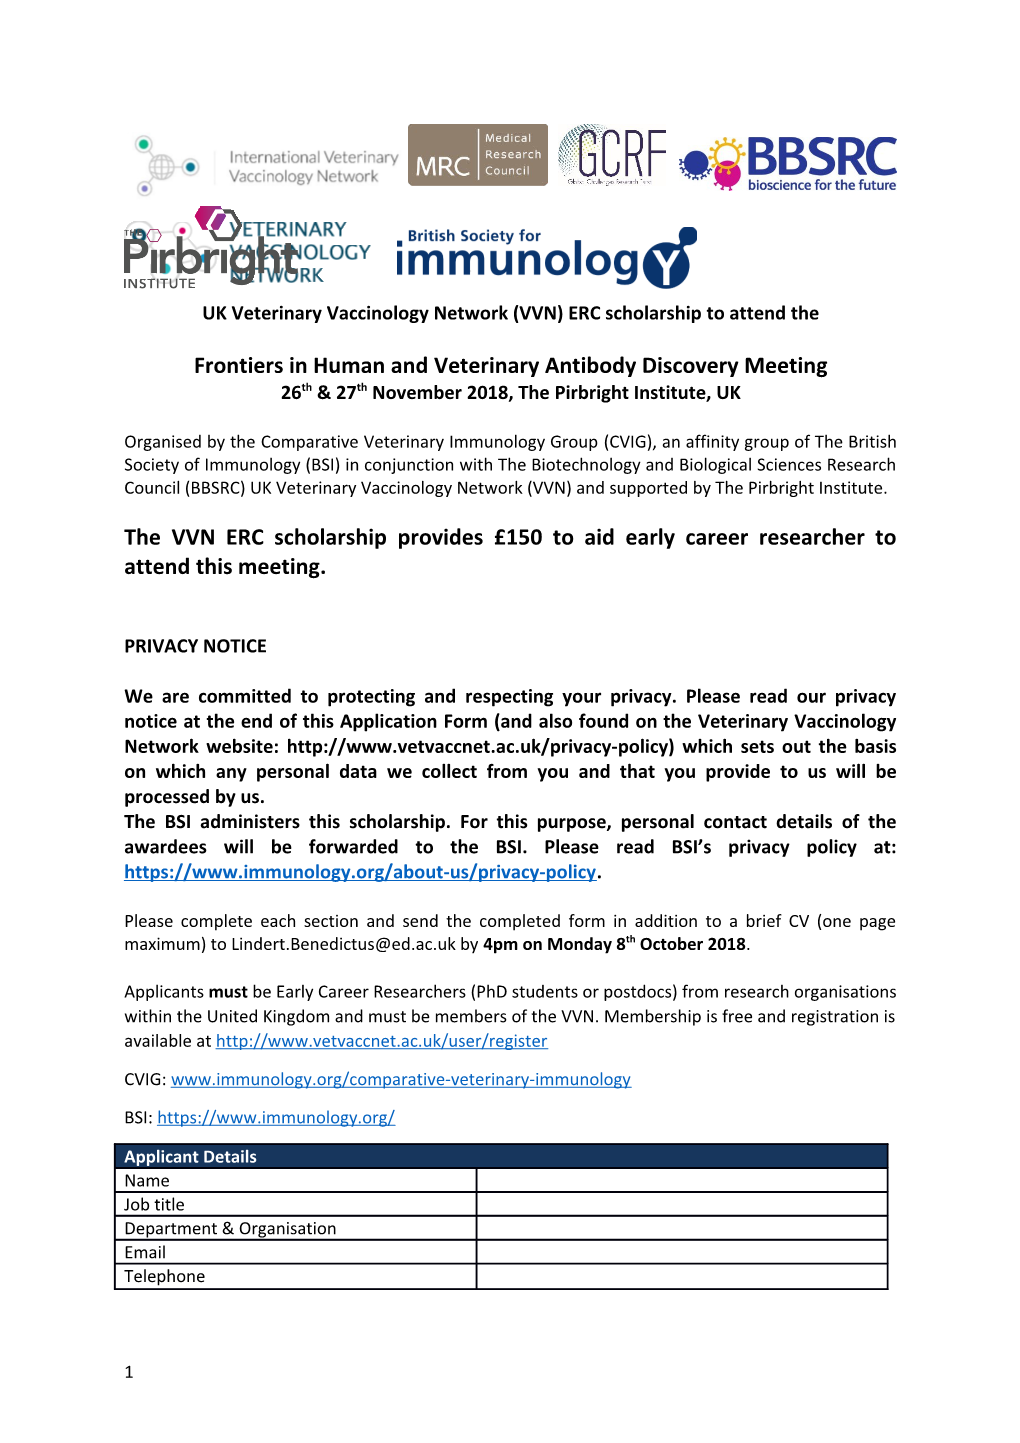 UK Veterinary Vaccinology Network(VVN)ERC Scholarship to Attend The